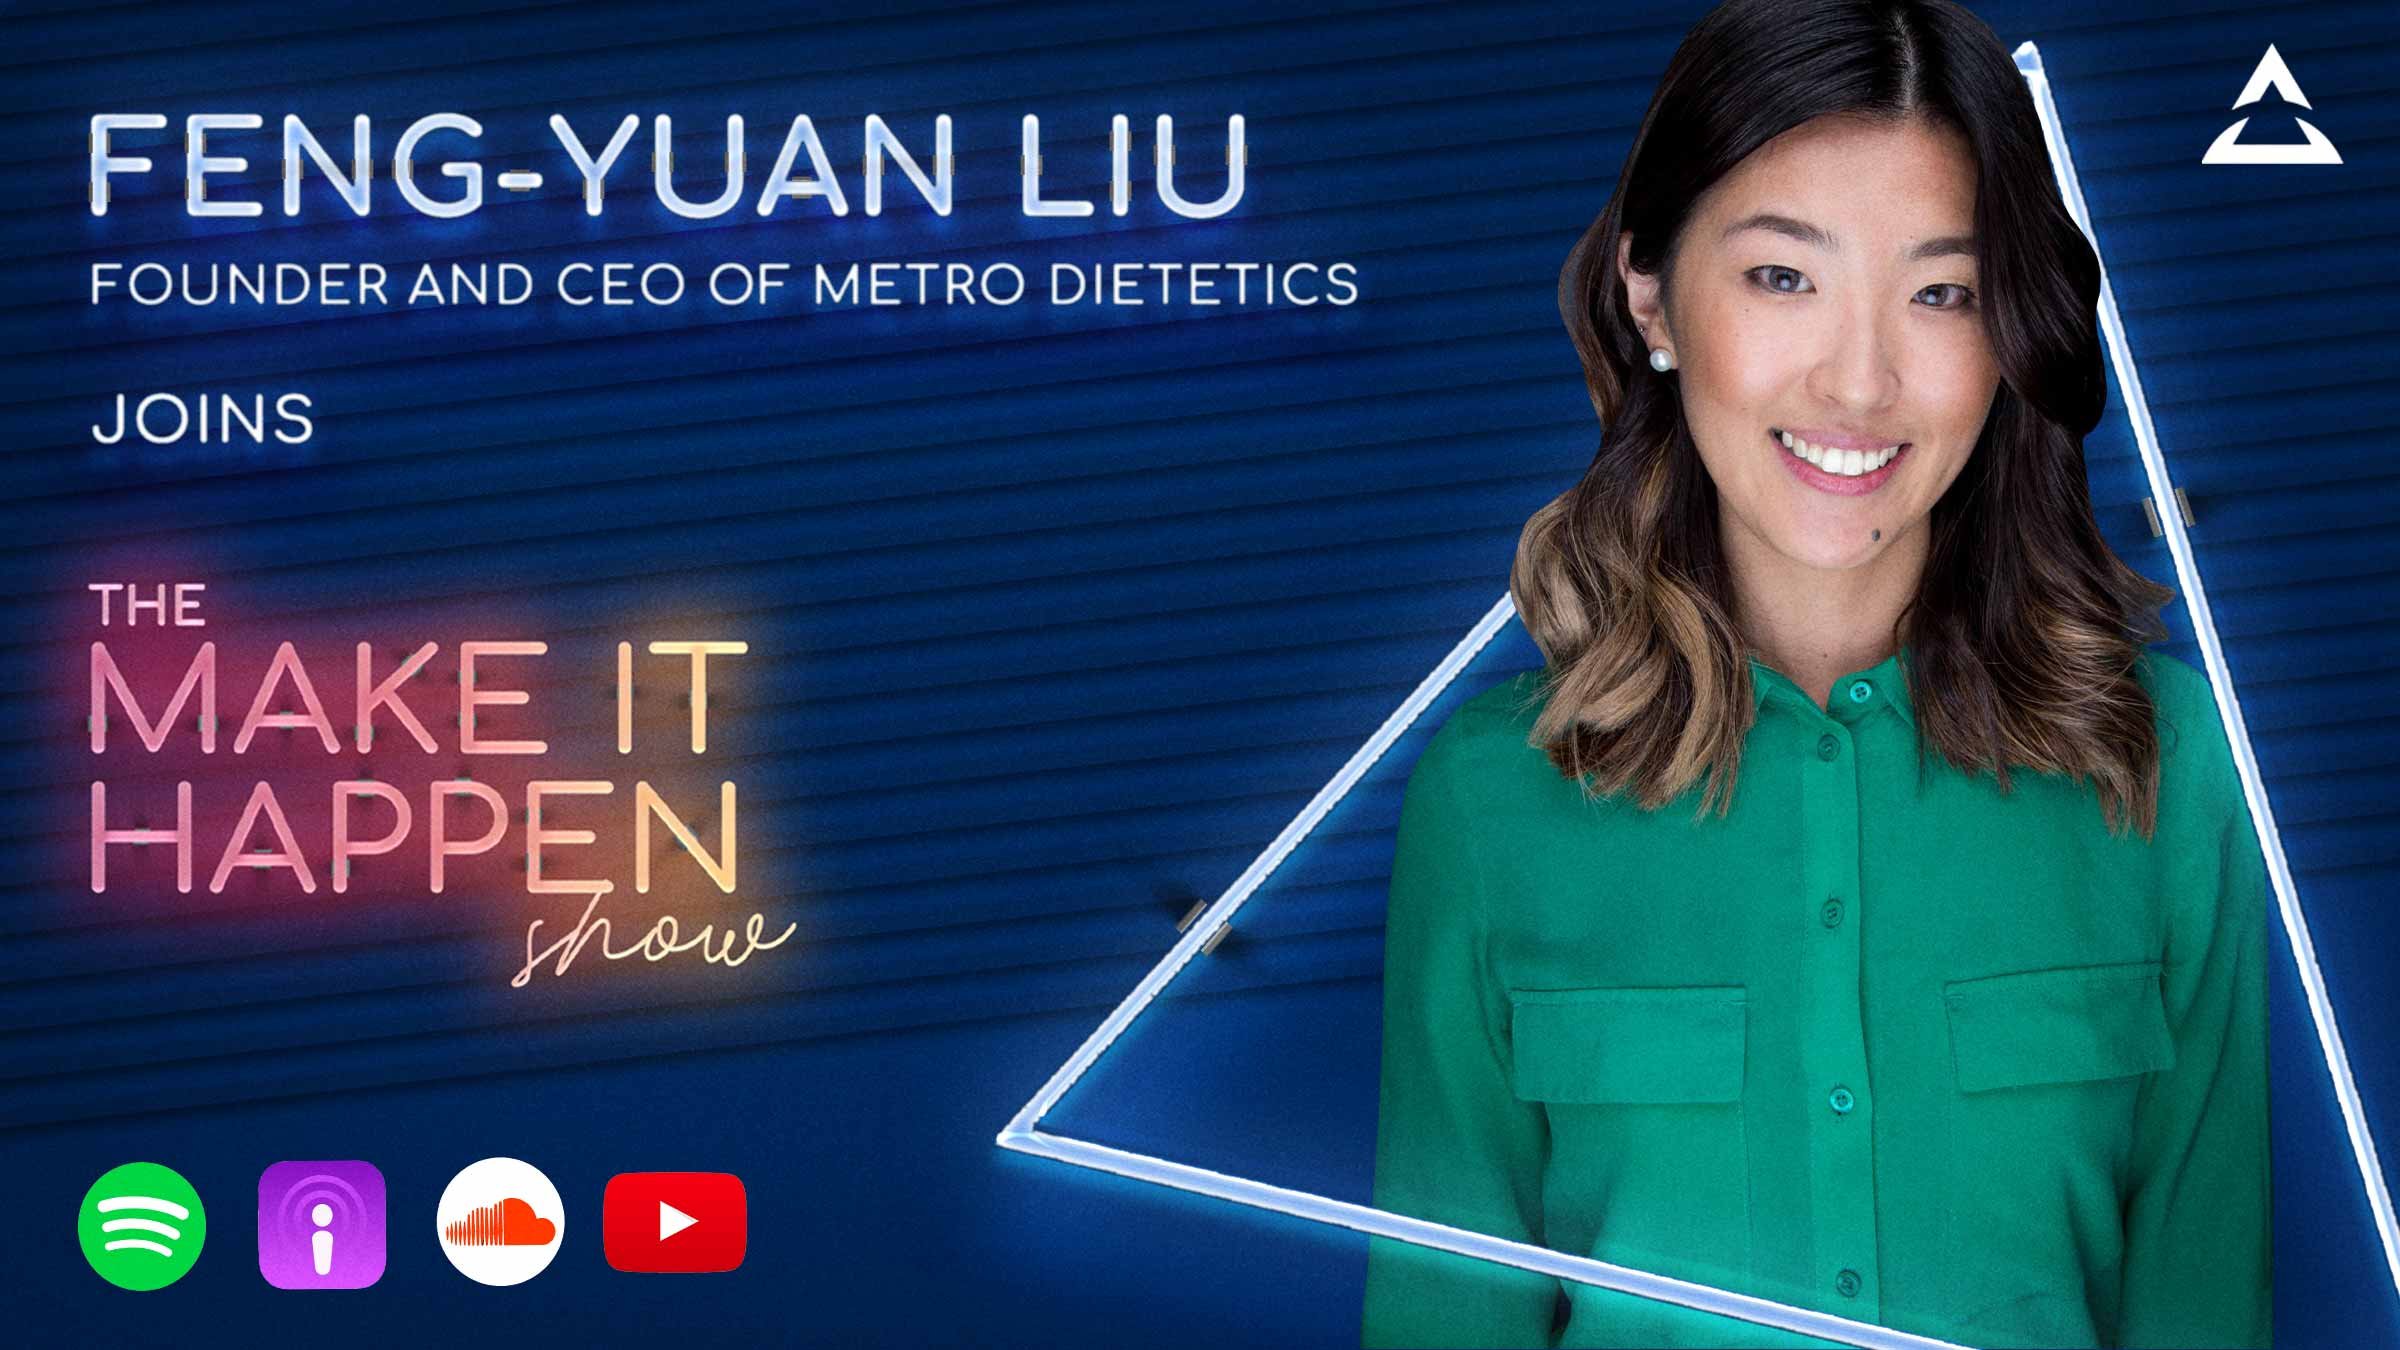 Feng-Yuan Liu, Founder and CEO of Metro Dietetics joins The Make It Happen Show